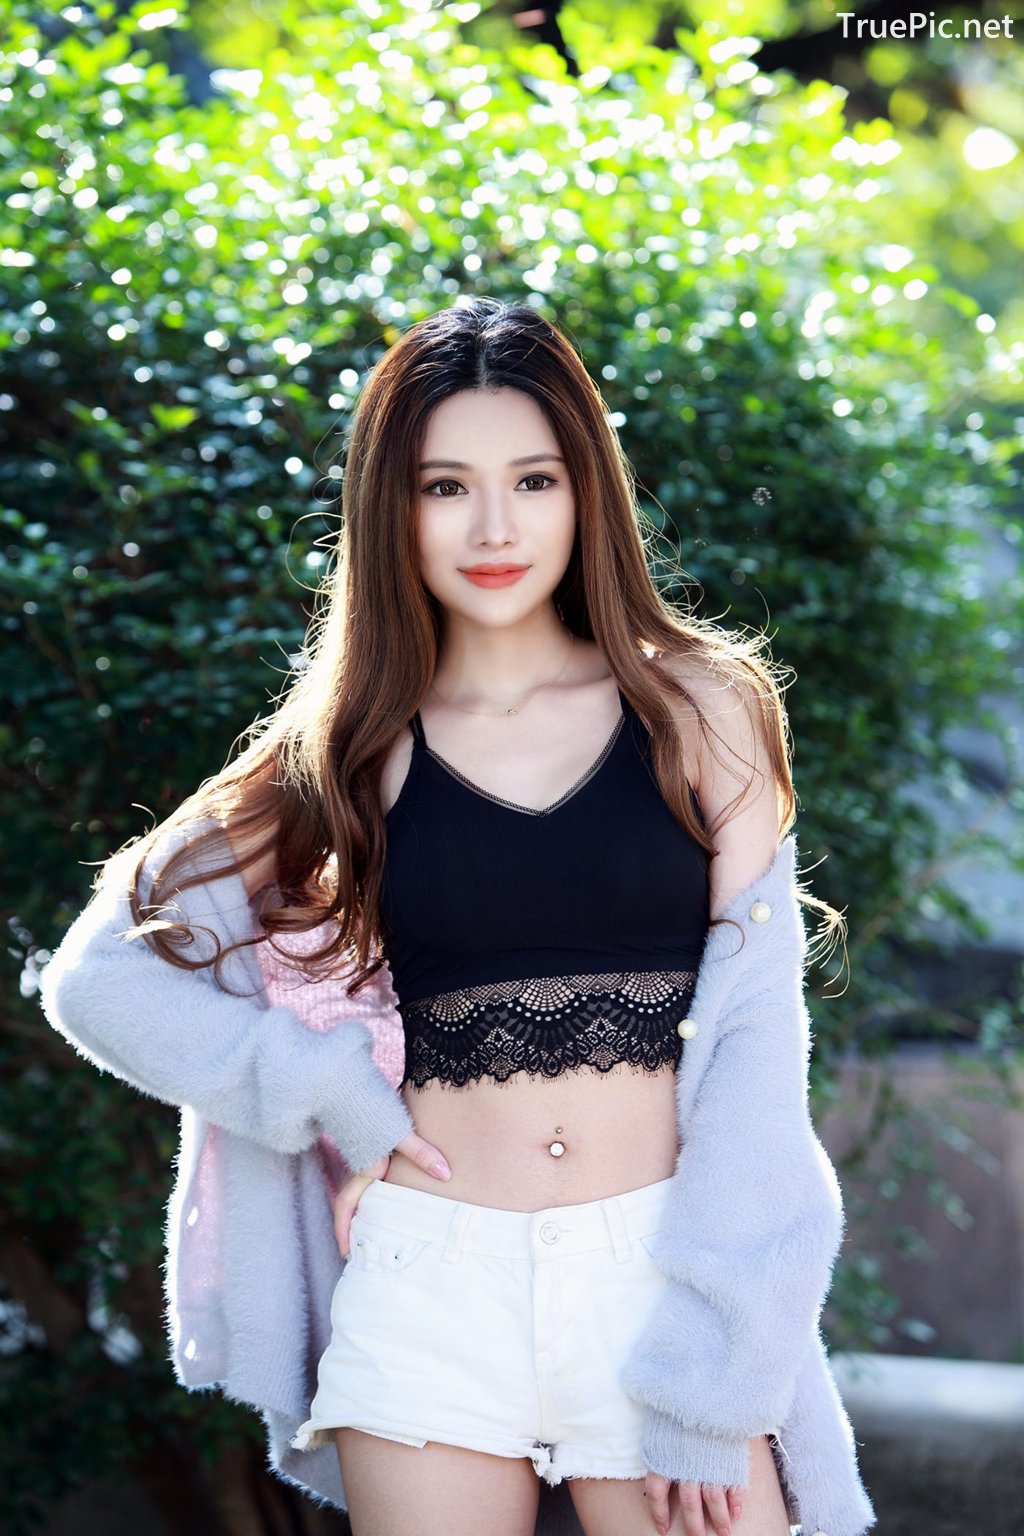 Image-Taiwanese-Model–莊舒潔–Hot-White-Short-Pants-and-Black-Crop-Top-TruePic.net- Picture-18